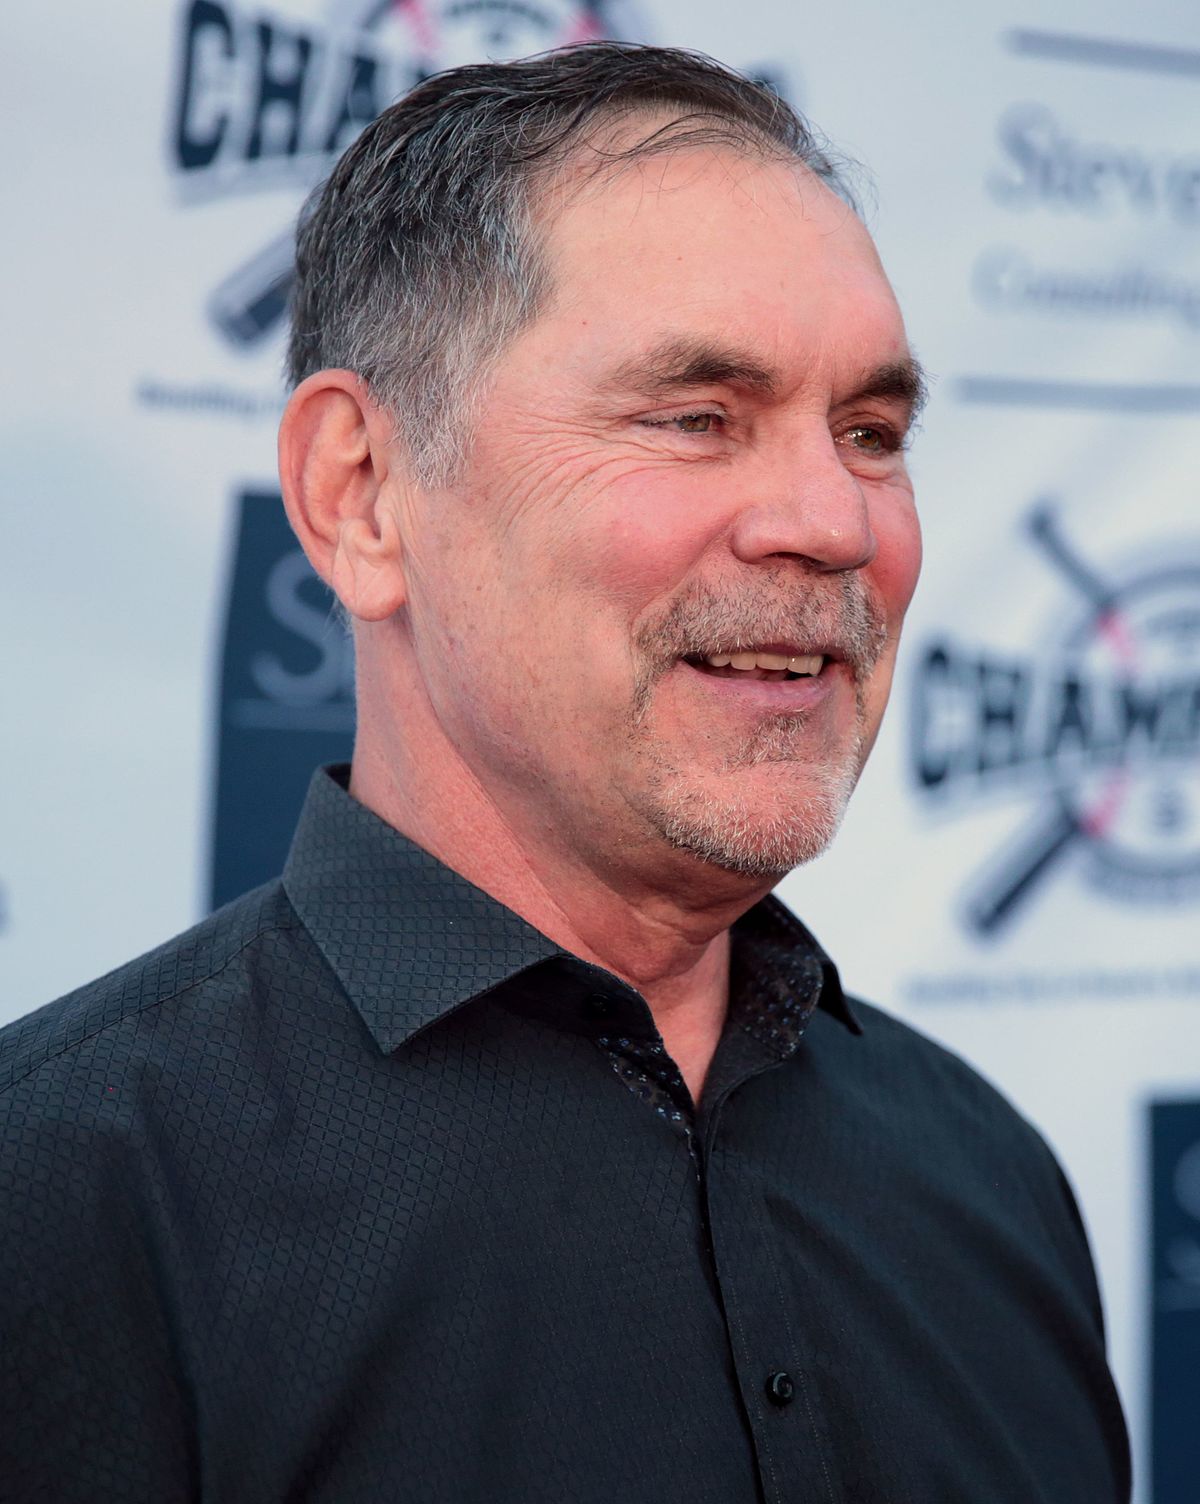 Rangers hire SF Giants legend Bruce Bochy as manager - Sports